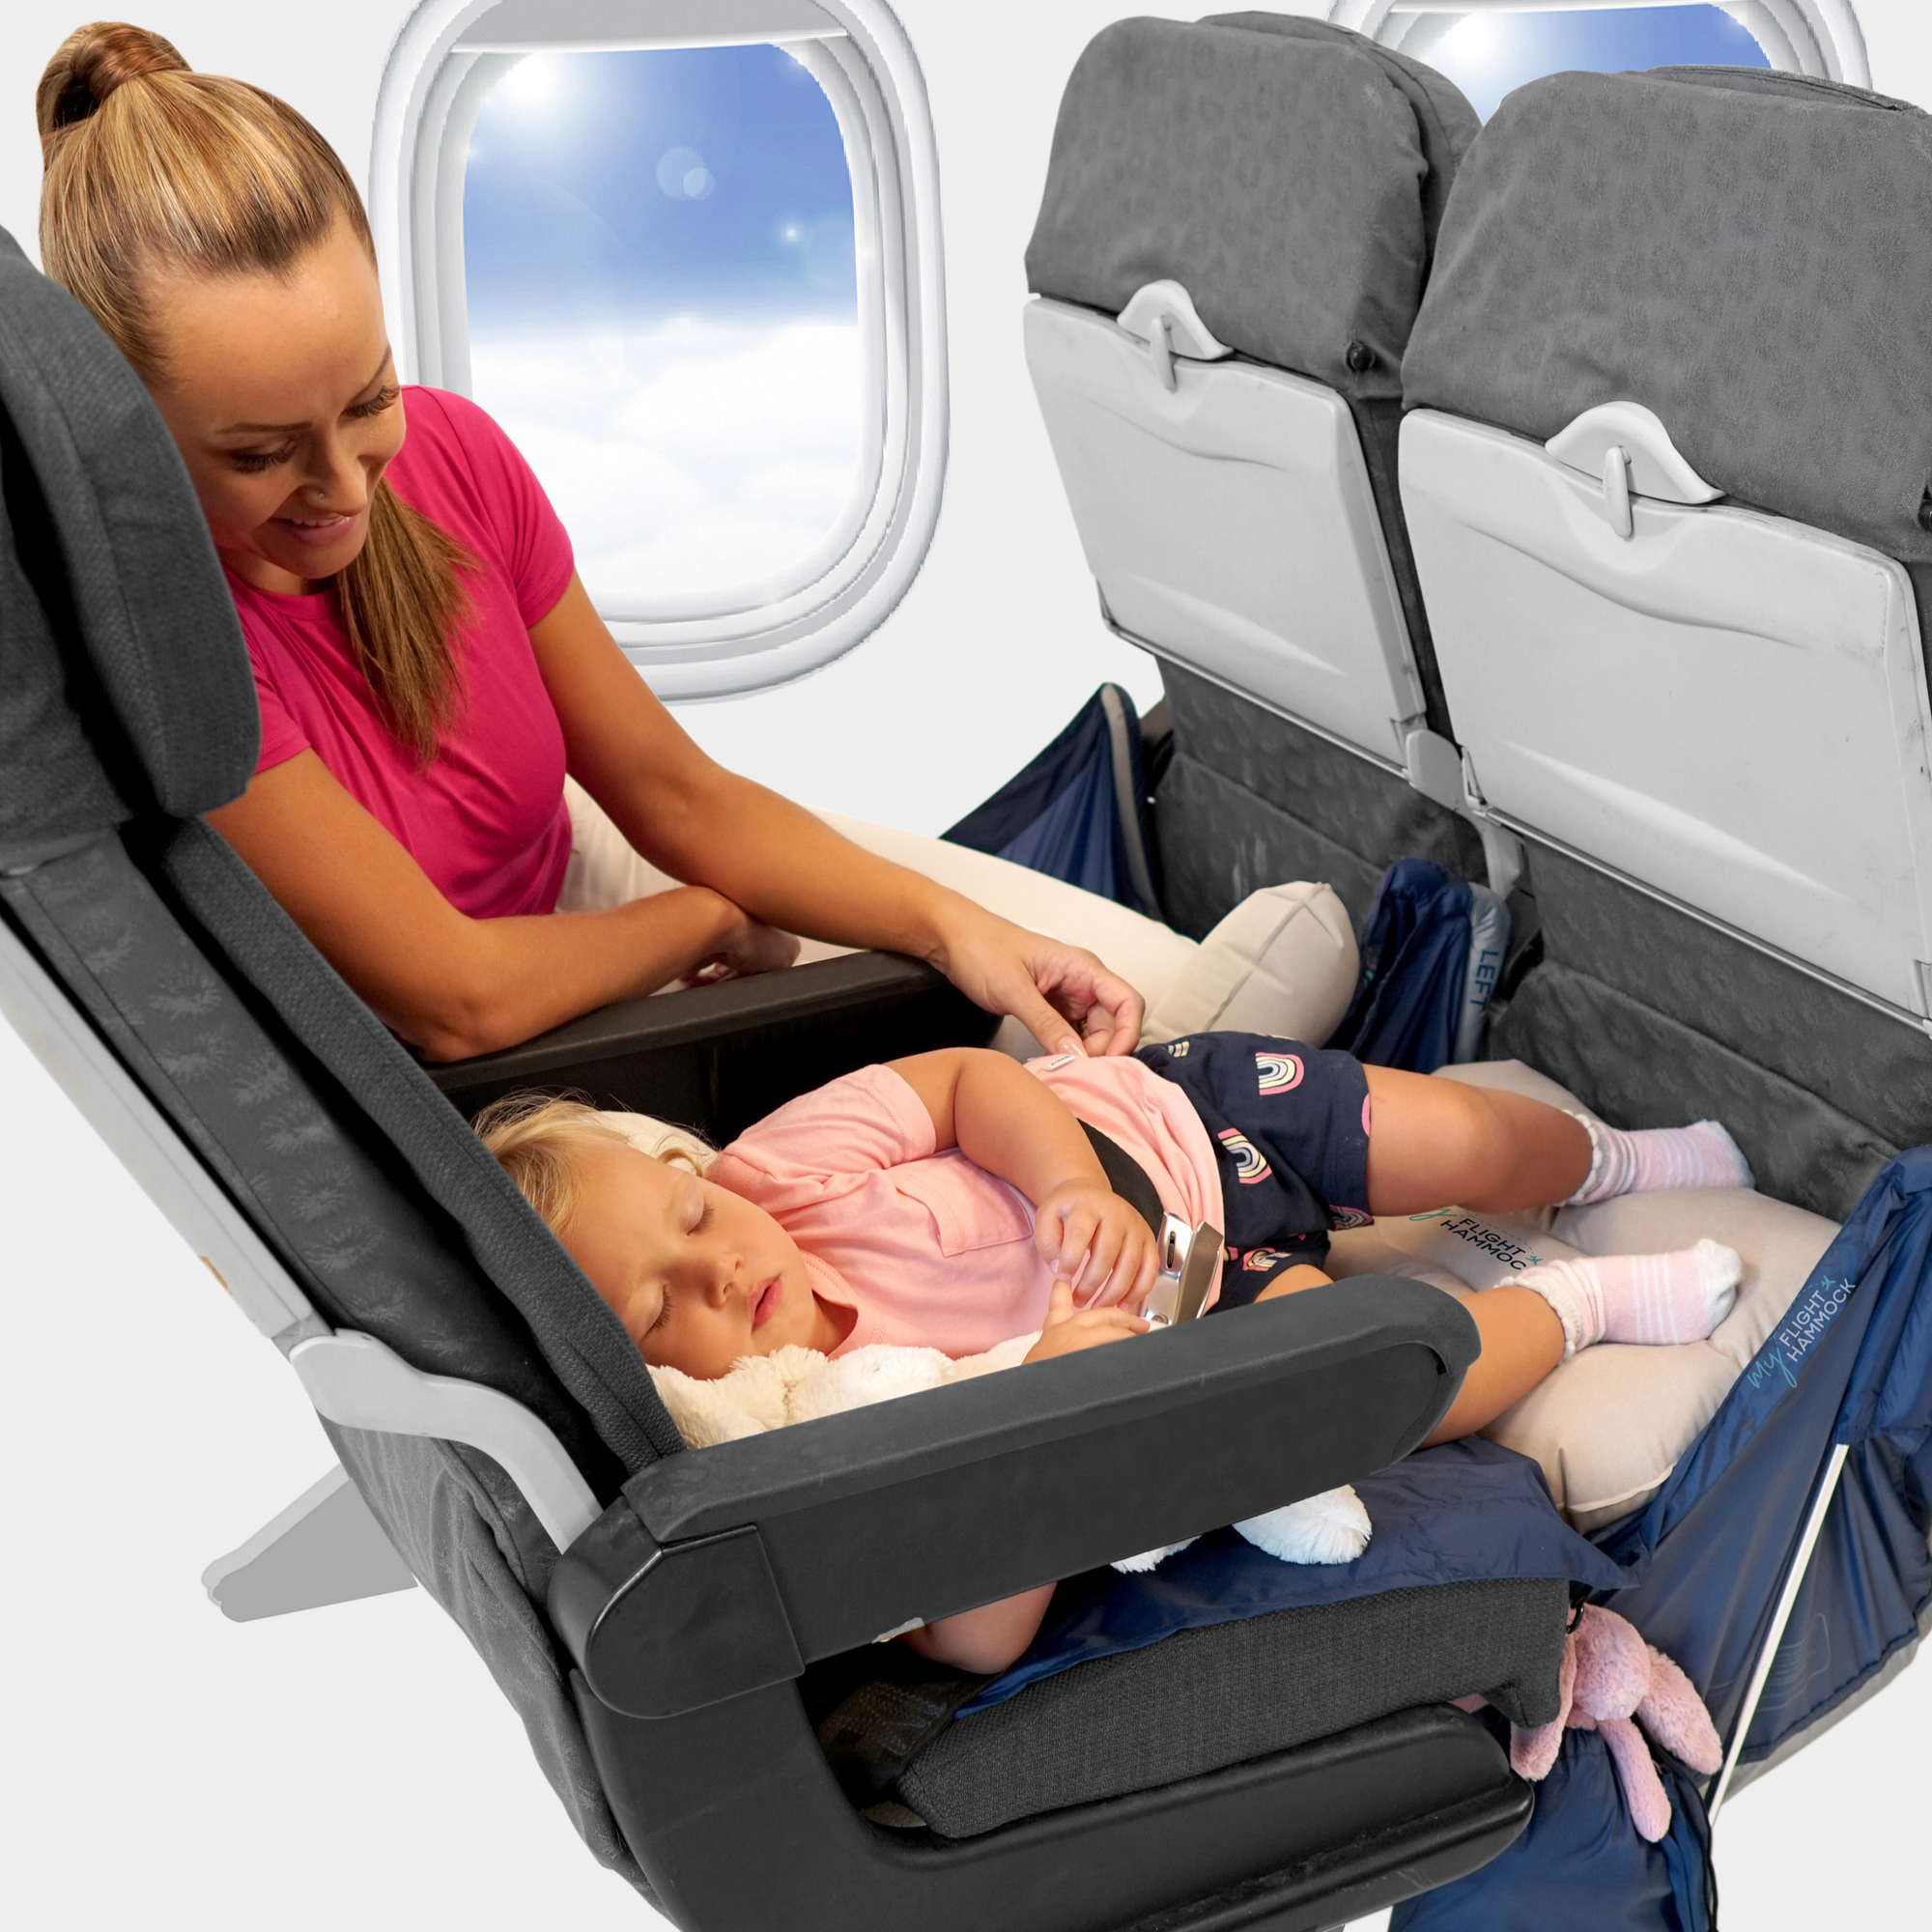  UNARK Airplane Footrest for Kids,Airplane Travel Accessories  for Kids,Travel Foot Rest for Airplane Flights,Footrest Airplane  Portable,Toddler Airplane Seat Extender for Kids,Airplane Foot Hammock :  Office Products